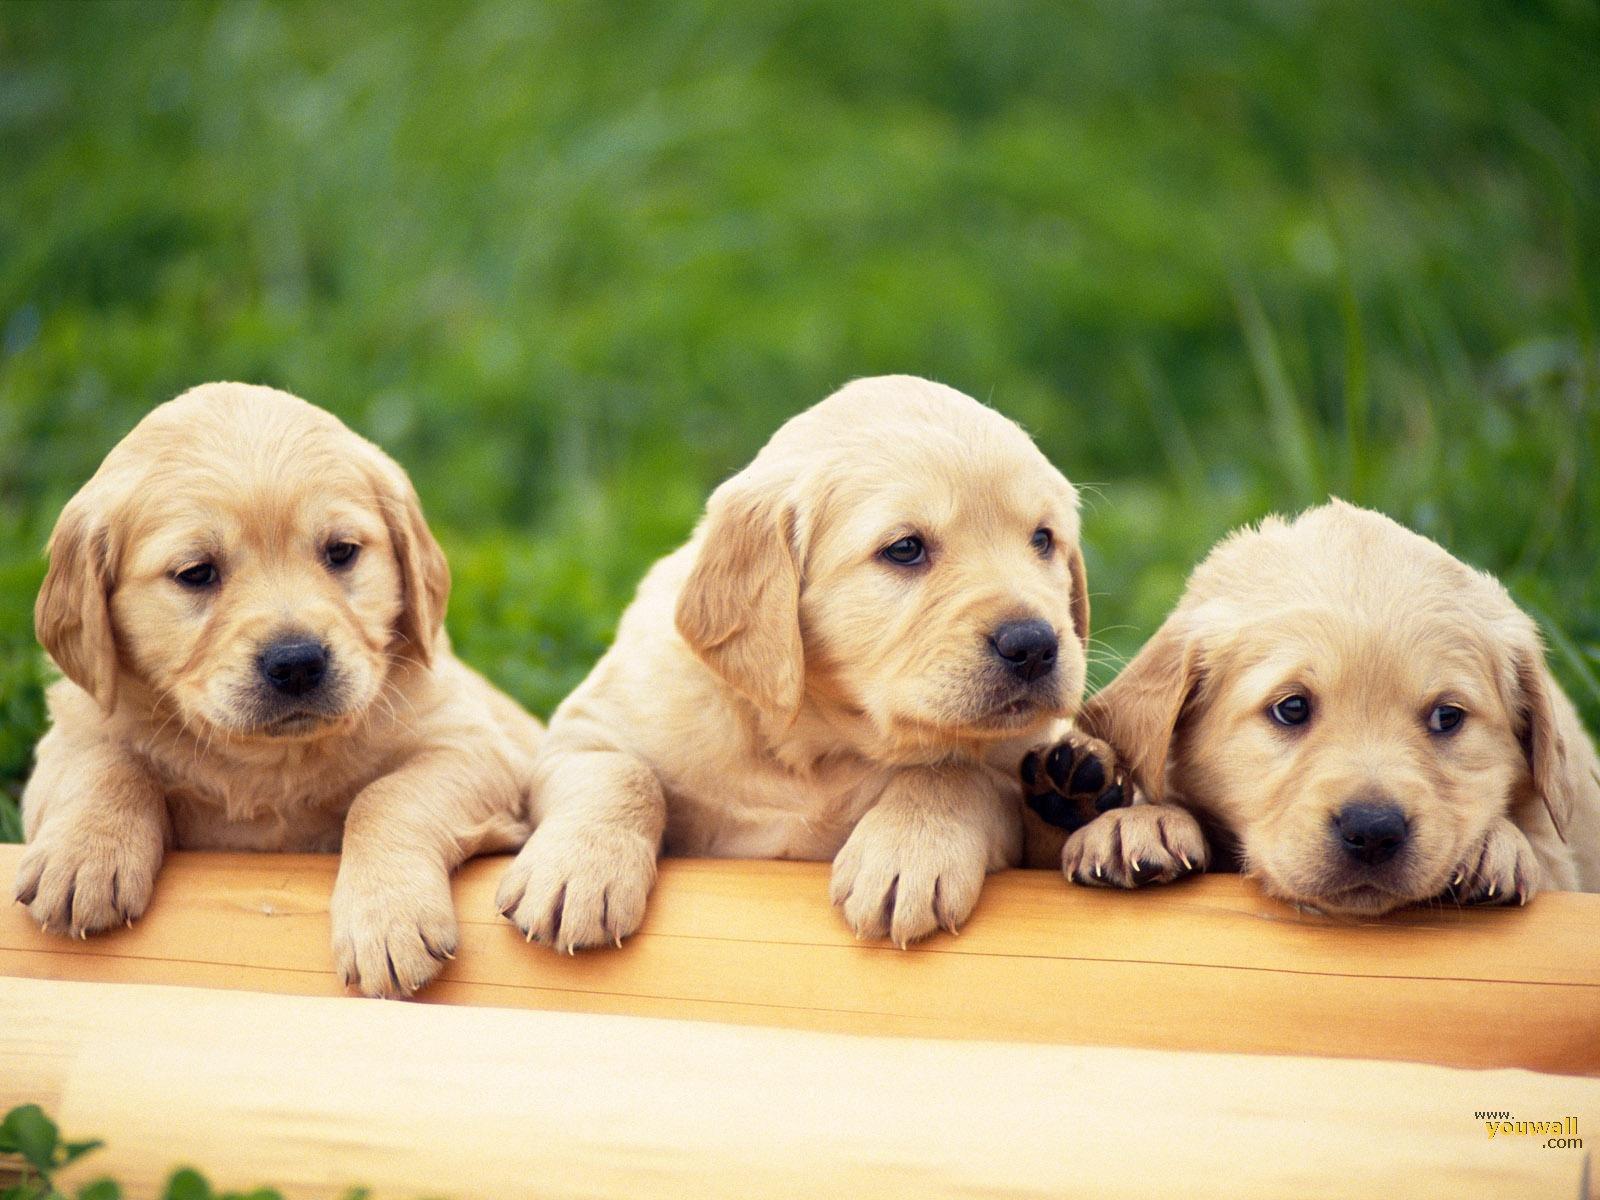 Dogs Wallpaper, Dog Wallpaper Of Cute Puppies